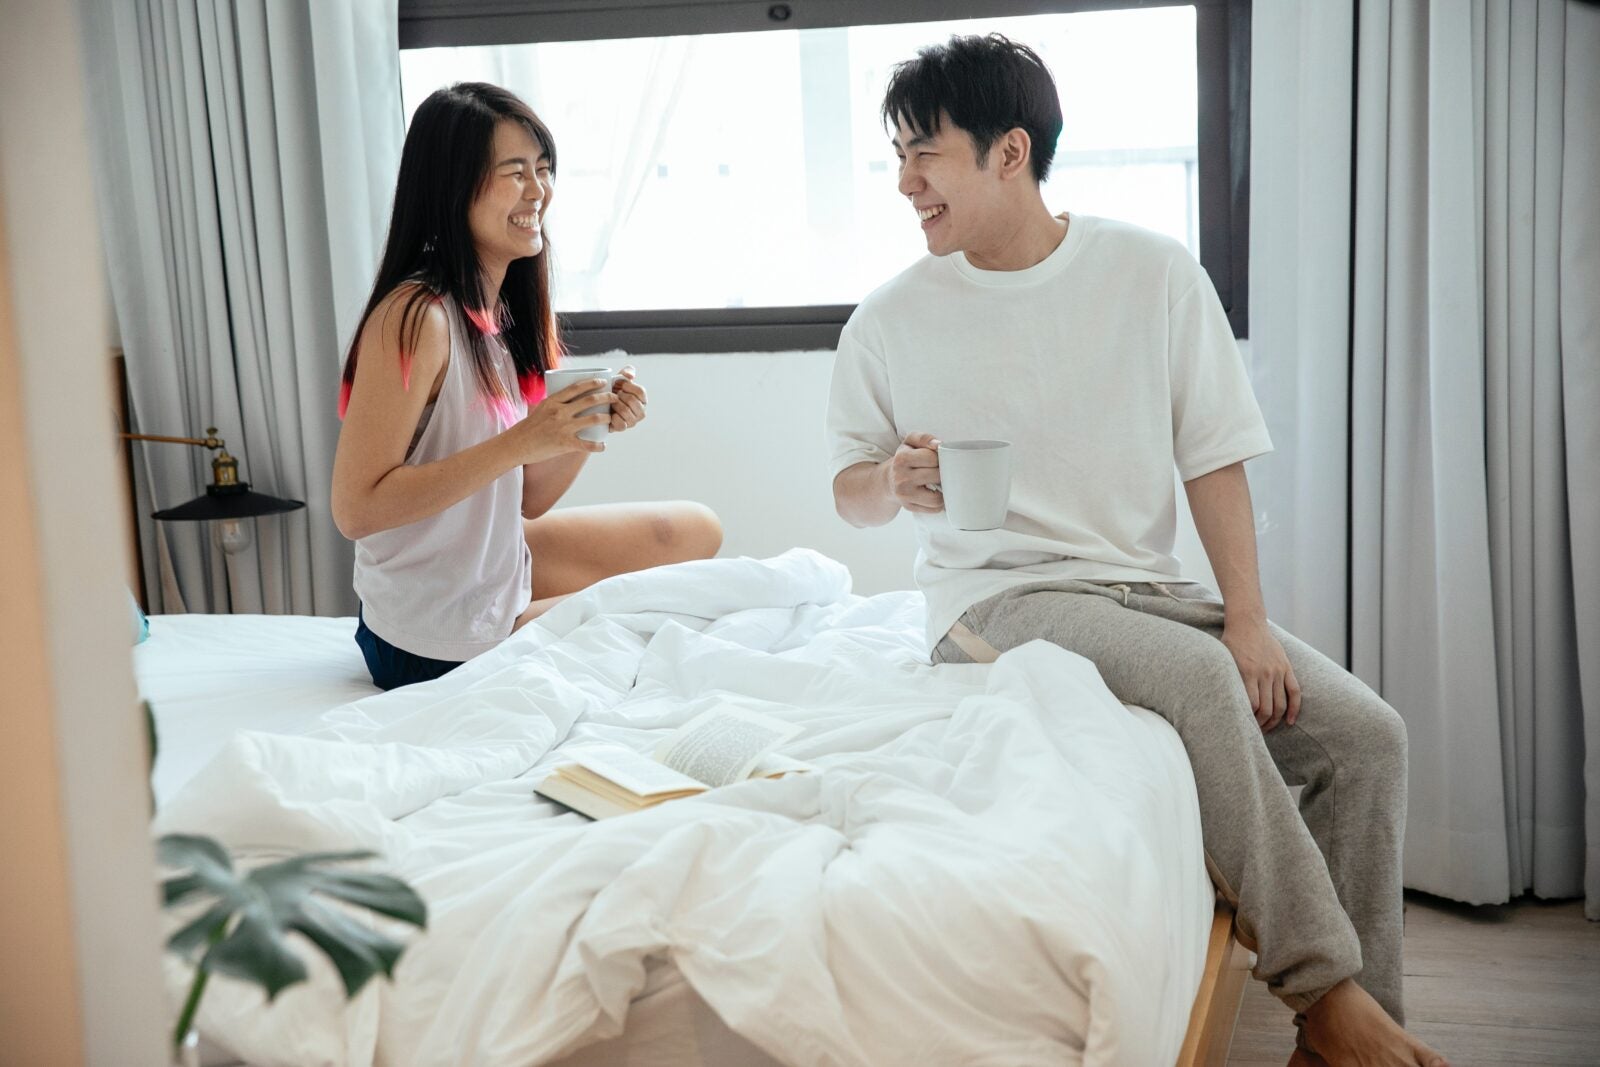 A couple sitting in bed and laughing together.